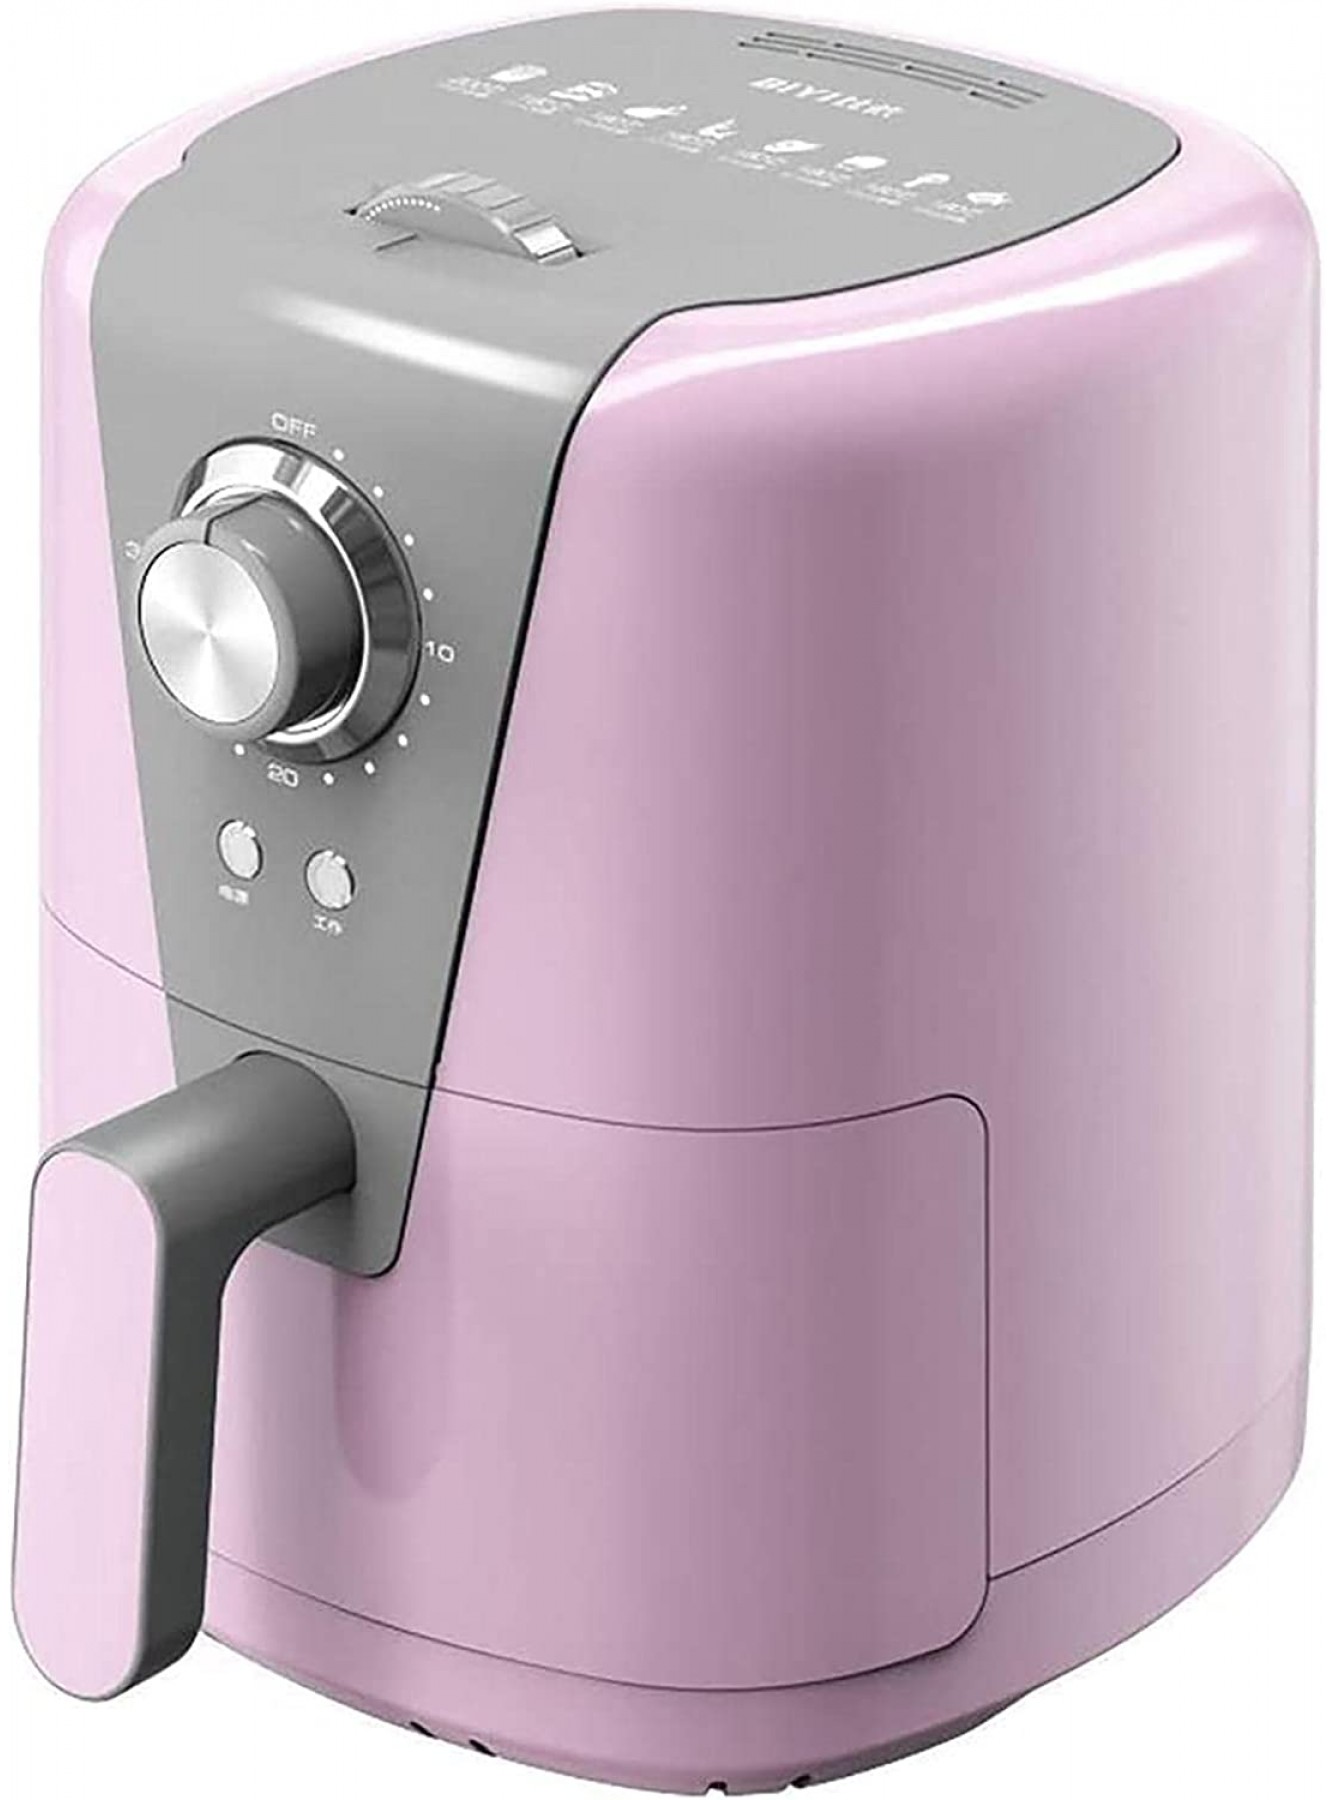 SHBV Air Fryer L 1 5QT 1000W Small Air Fryer with Temperature Control and Timer Knob Recipe Guide Auto Shut Off Feature Mini Air Fryer Oven pink B094ZV92VG